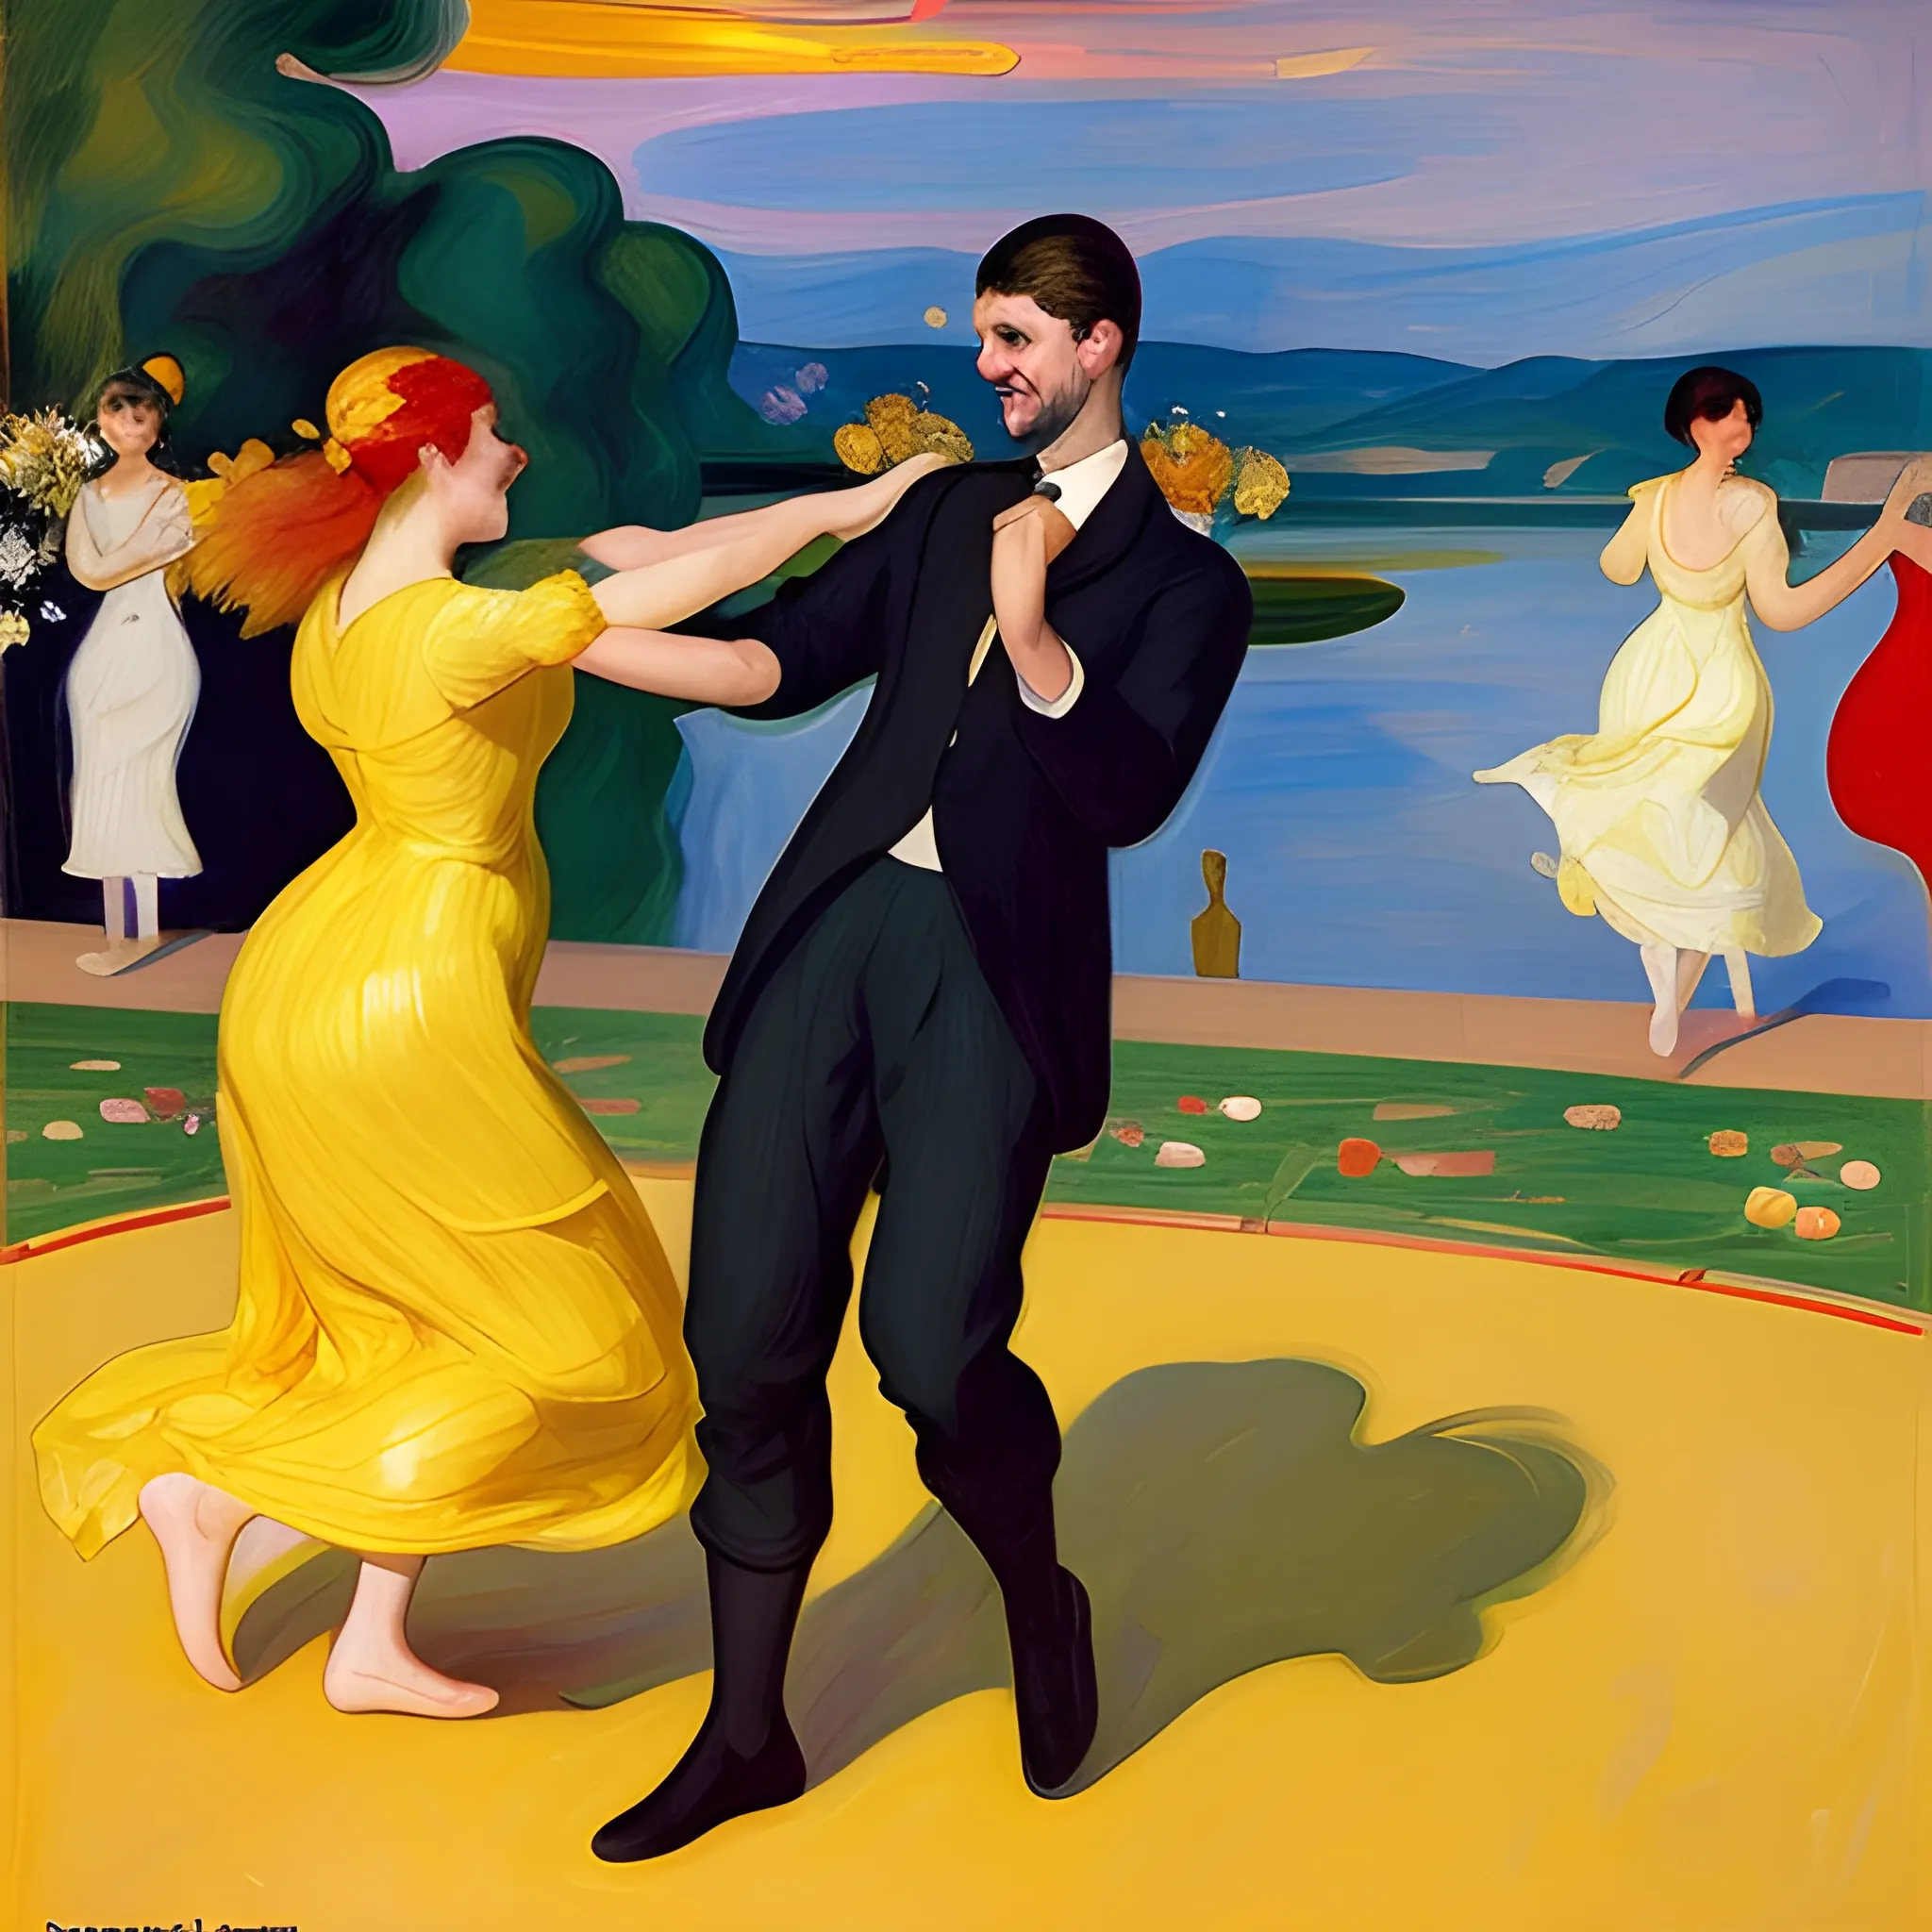 A painting of Women and men in the party looking happy dancing n 